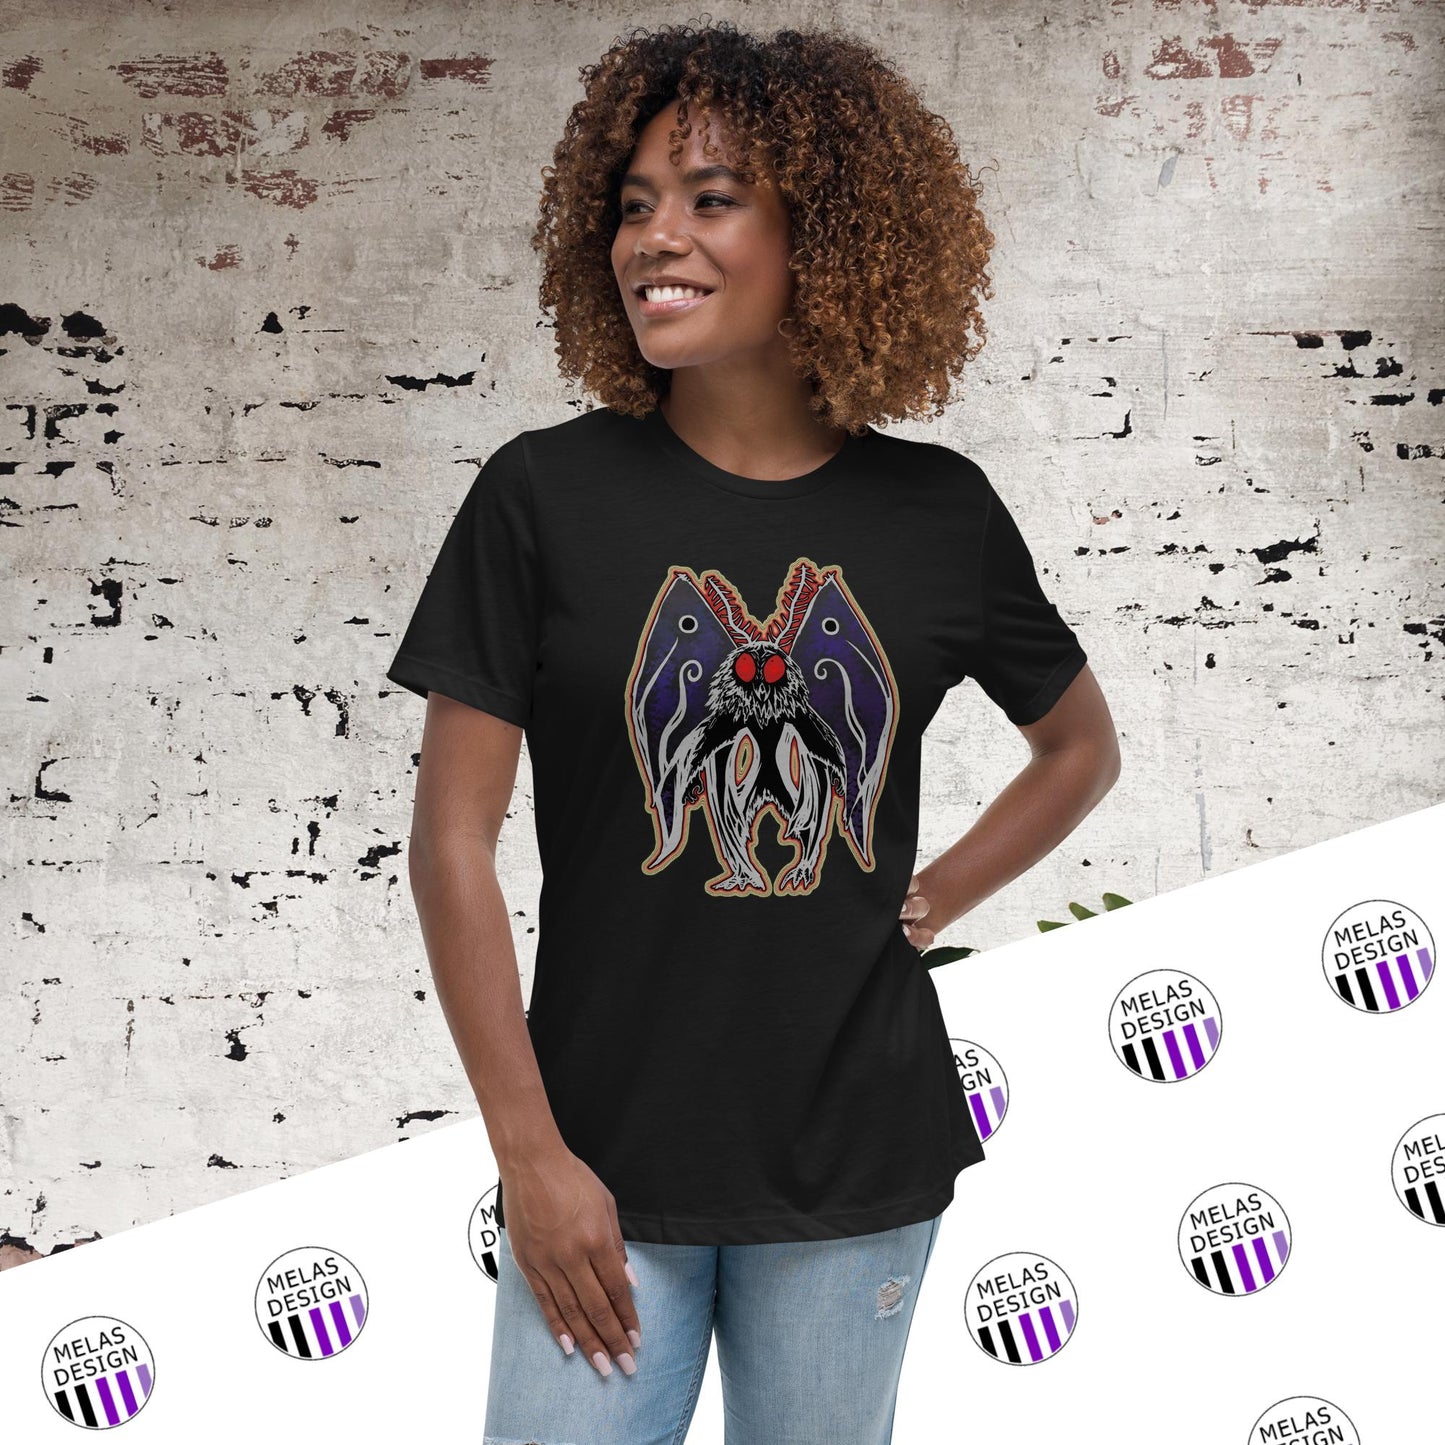 Mothman Cryptid Women's Relaxed T-Shirt; mothman t-shirt; cryptid t-shirt; west virginia; point pleasant; Melasdesign; cryptid core; cryptids; cryptid collection; fashion; womens; S-3X